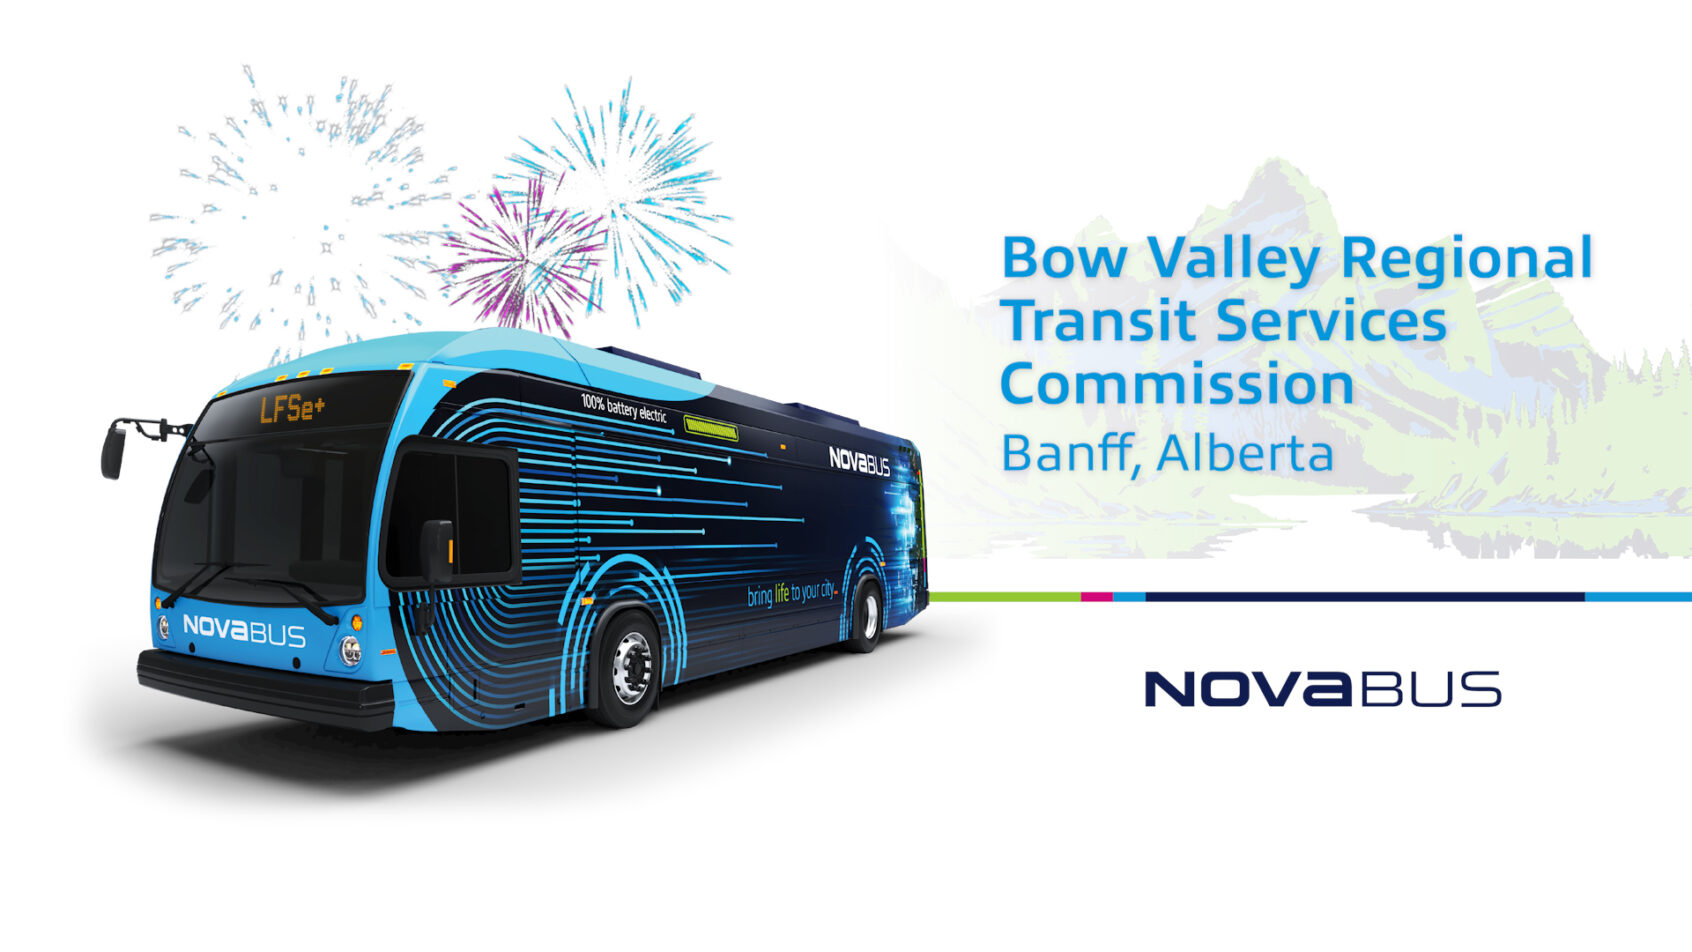 Bow Valley Regional Transit Services Commission in Banff, Alberta, continues electrifying its fleet with Nova Bus by acquiring its first LFSe+ battery electric buses